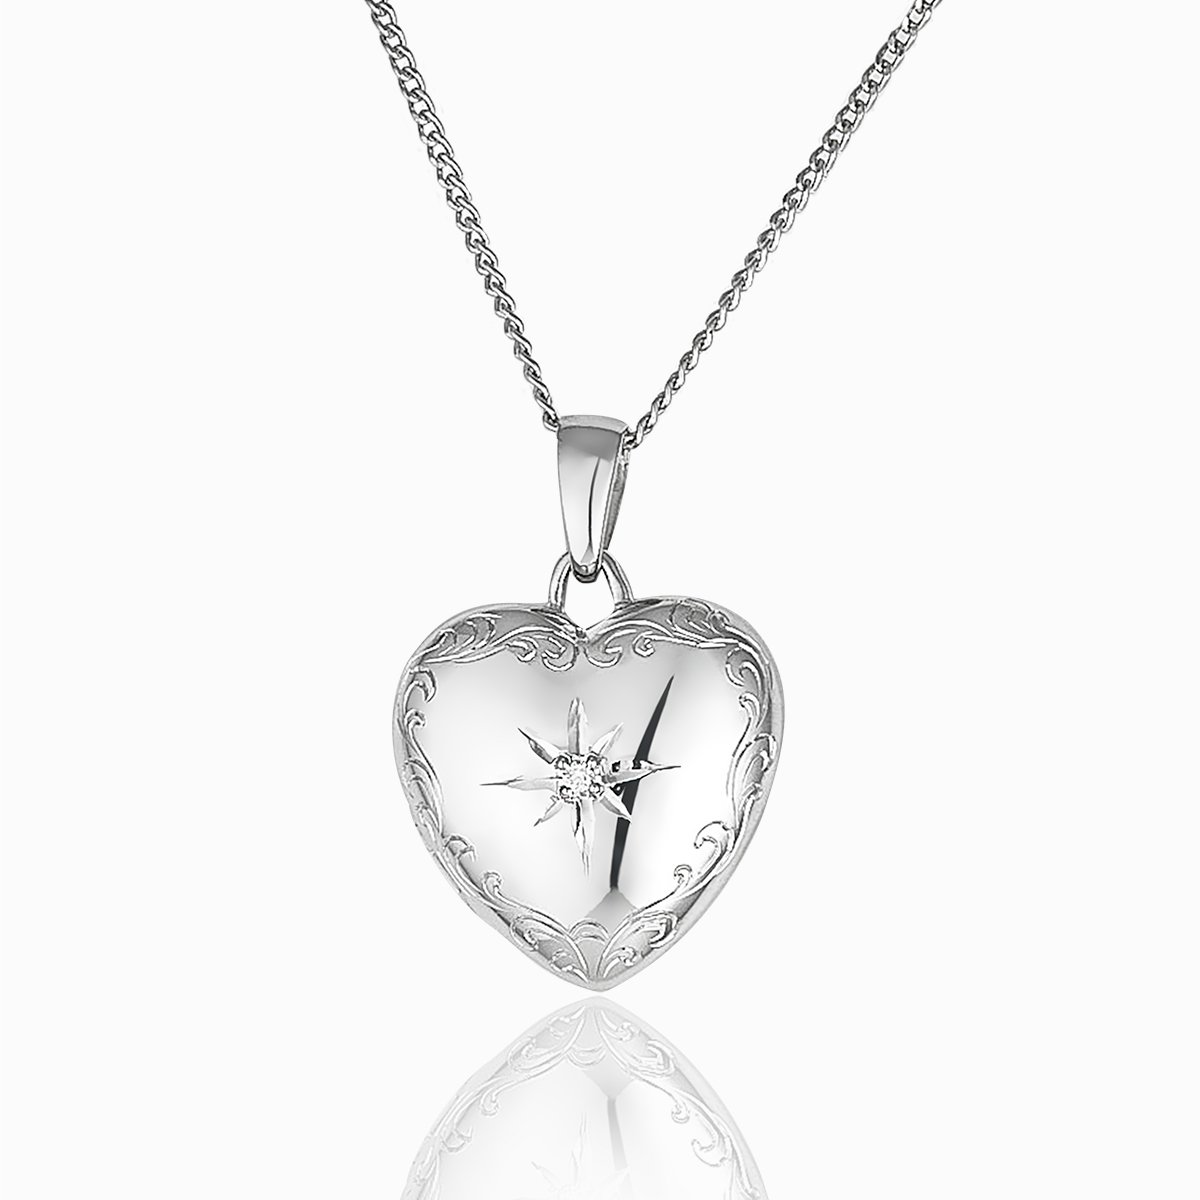 9 ct white gold heart locket set with a diamond on a 9 ct white gold curb chain.